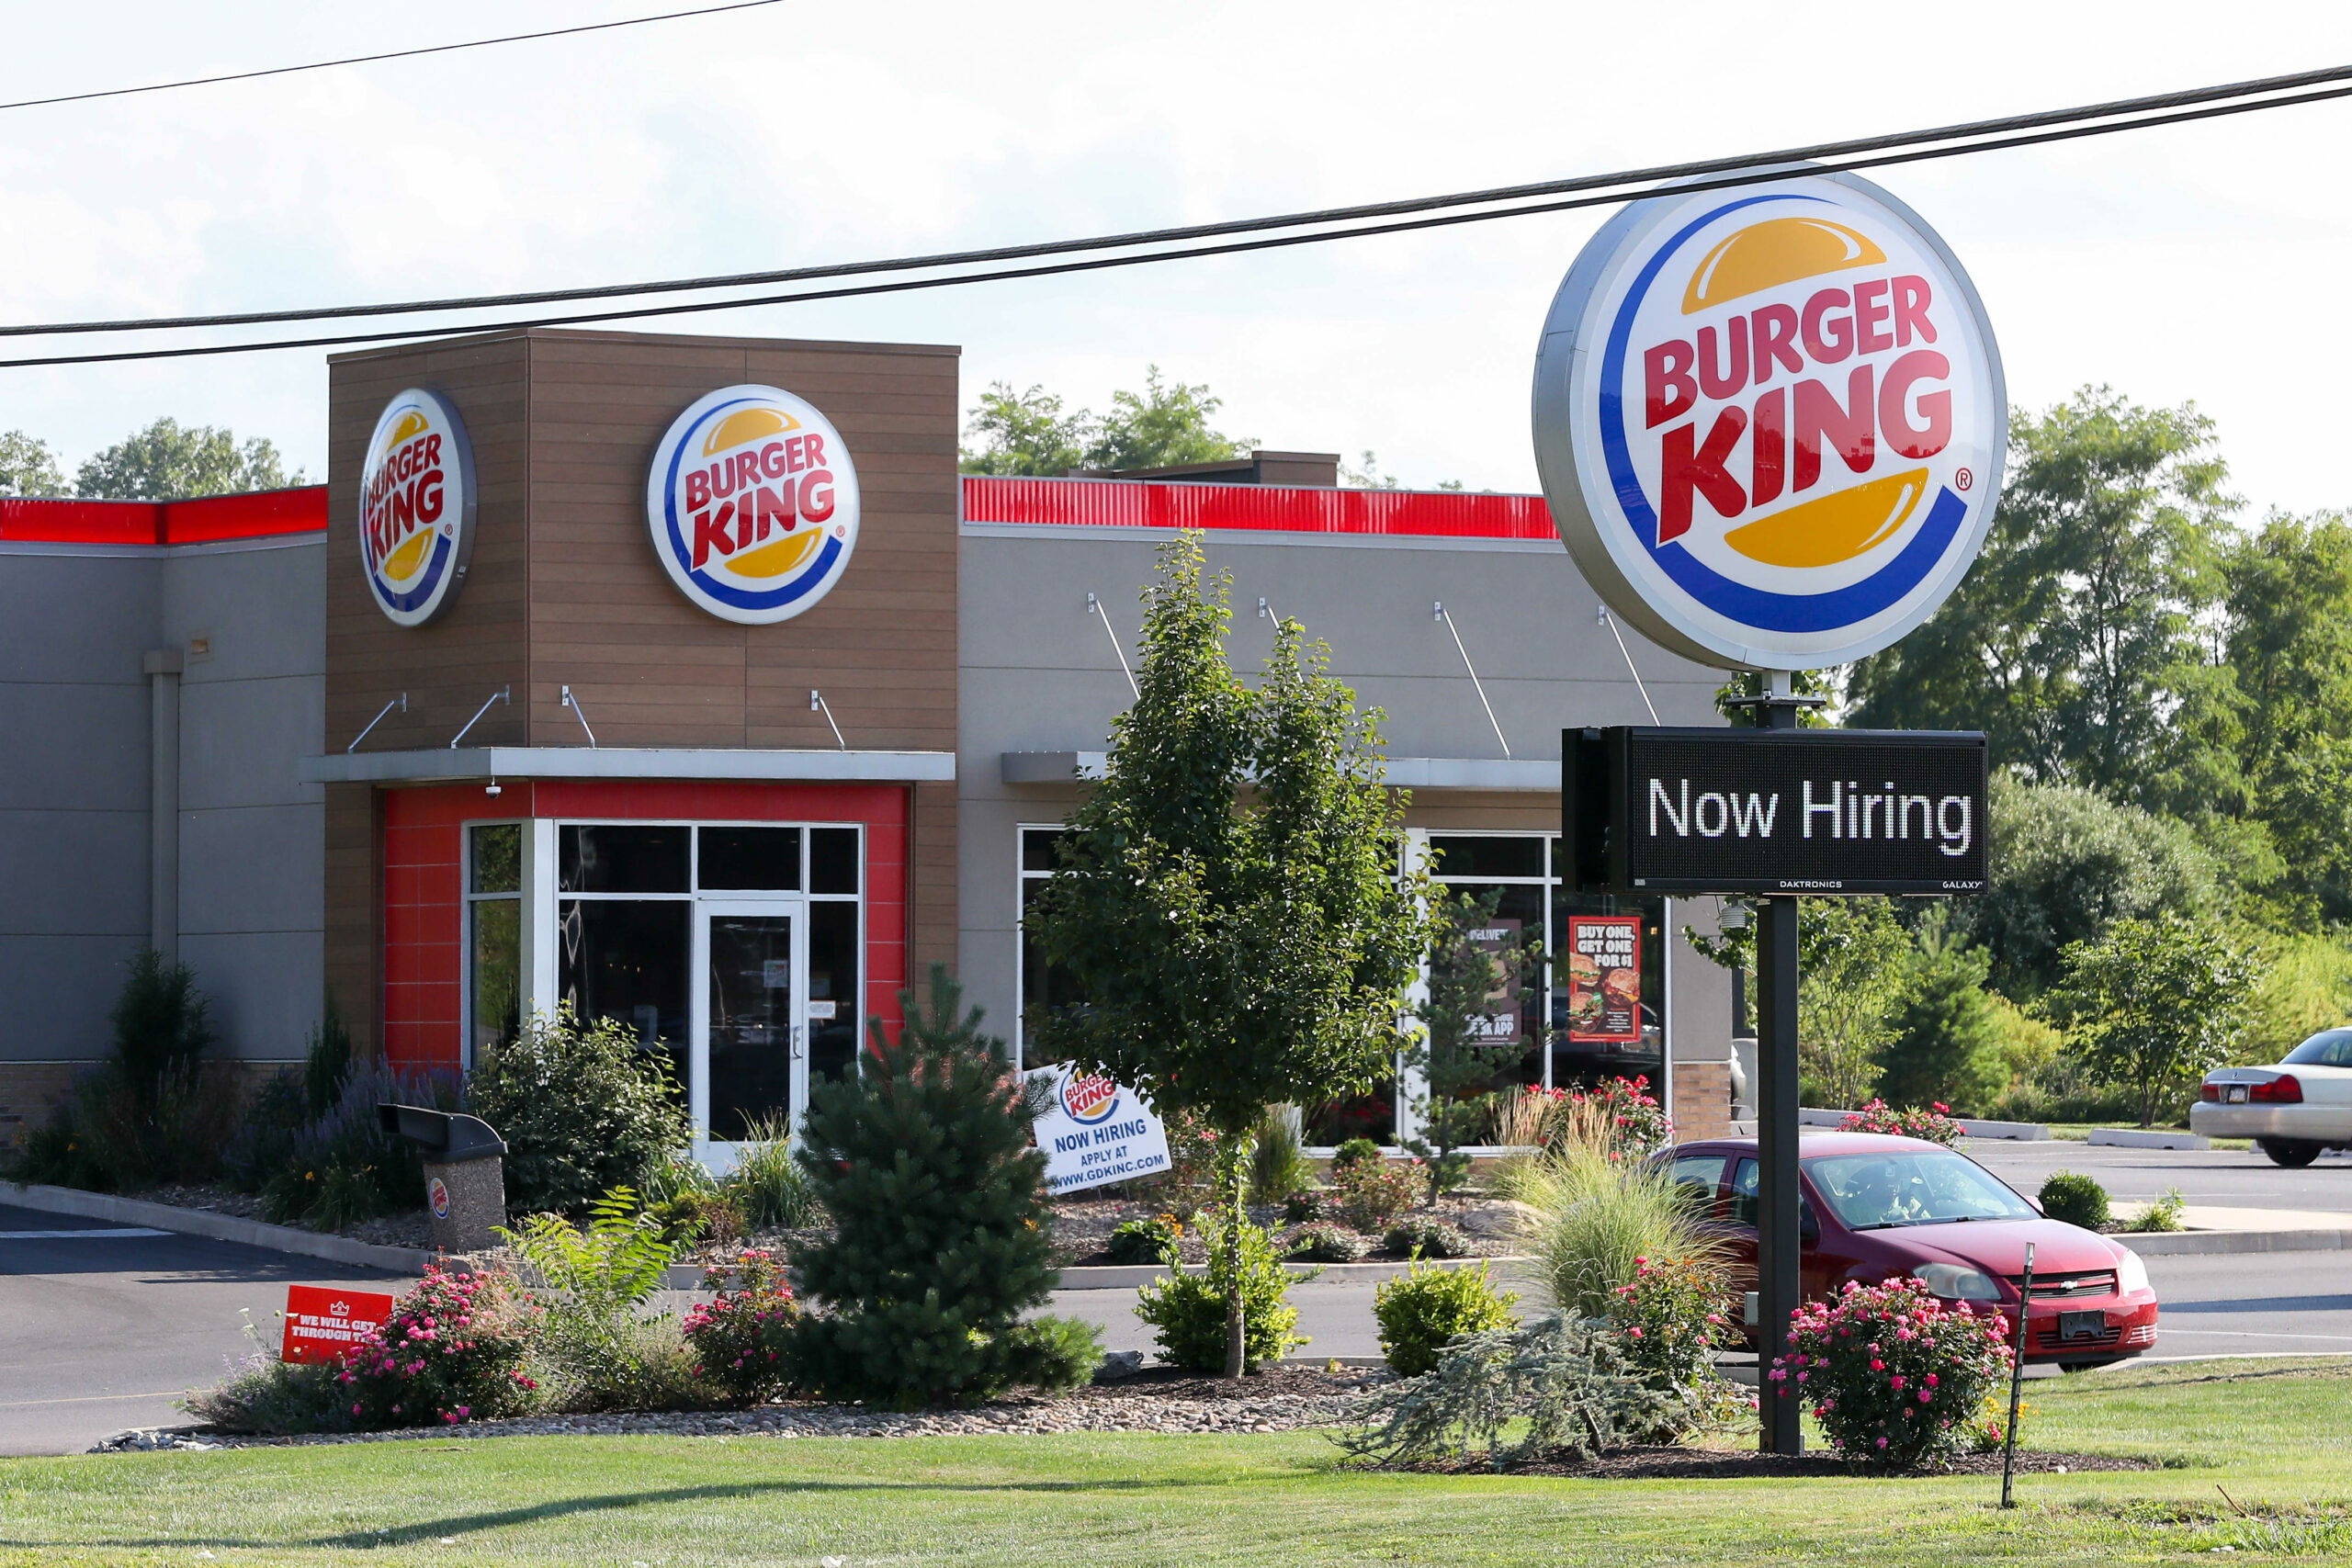 Burger King launches loyalty program nationwide as chain seems to invigorate U.S. gross sales